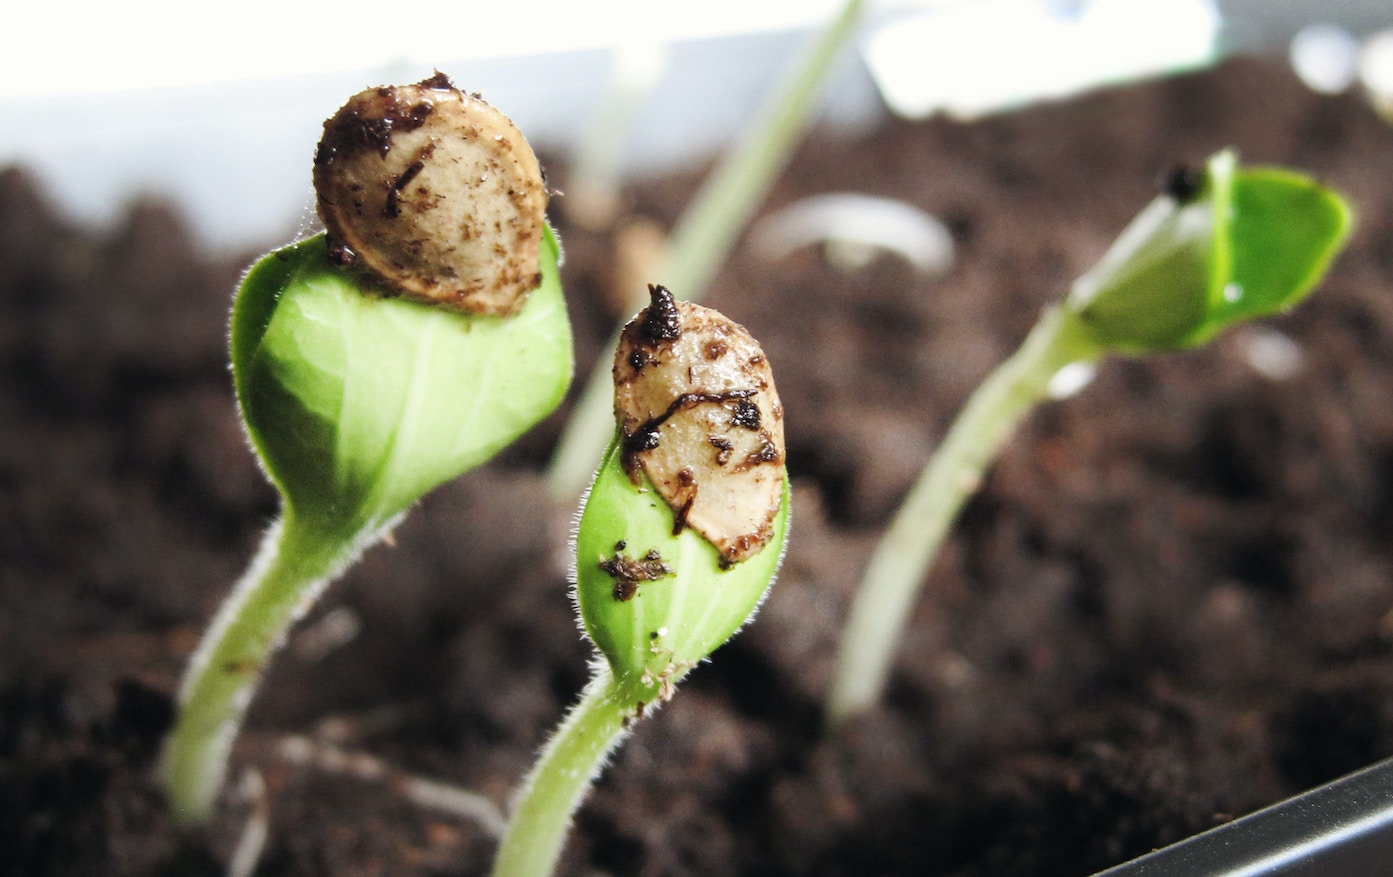 Image shows small plant shoots growing from the soil to demonstrate growth. The context here is to show how to scale up a business